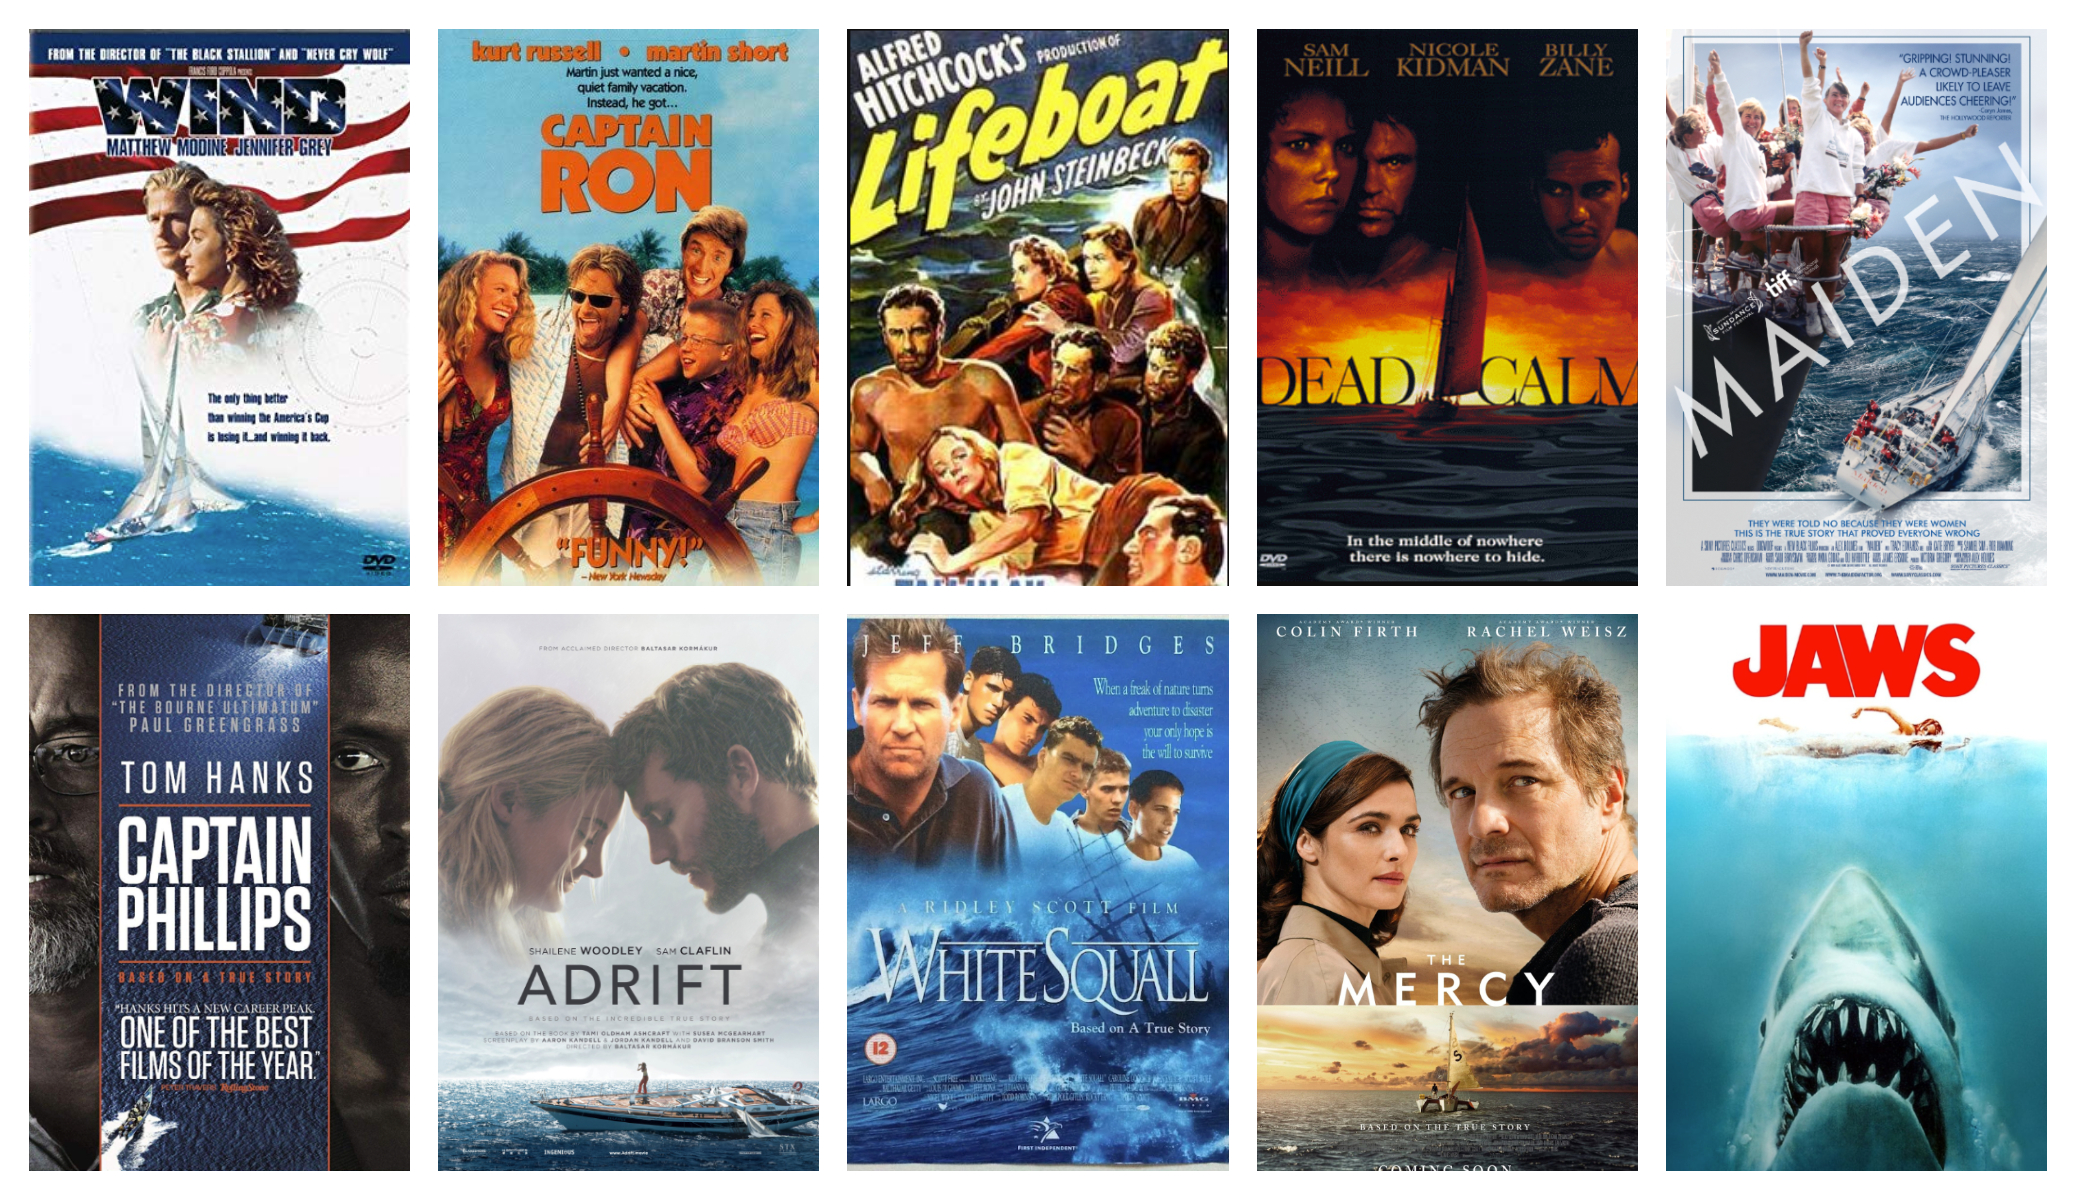 https://www.discoverboating.com/sites/default/files/10-Best-Boat-Movies.jpg